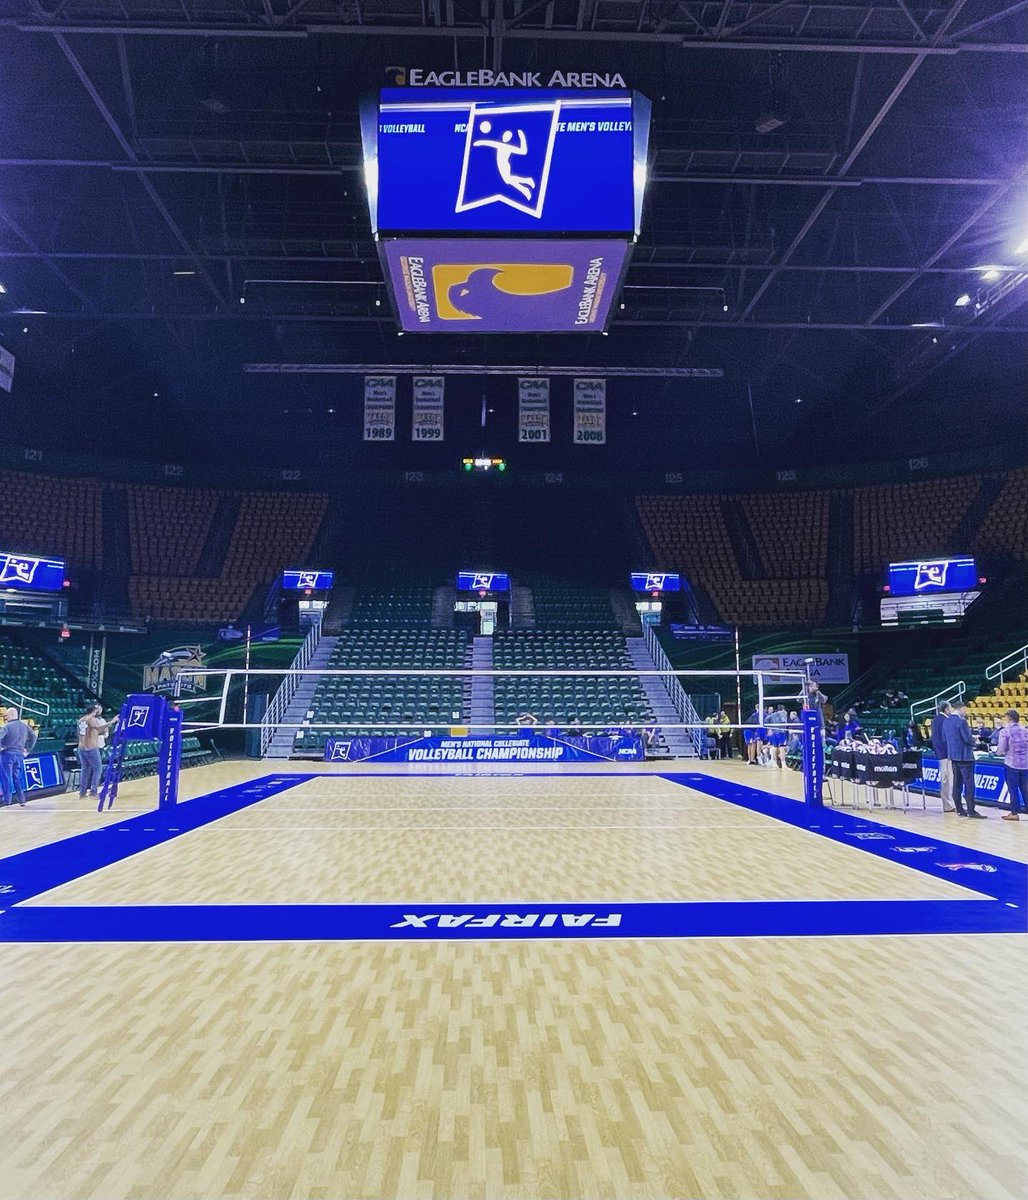 It’s almost time for the semifinals! Let’s go @LBSUMVB @PennStateMVBALL @UCLAMVB @HawaiiMensVB! 

#NCAAMVB #SportsImports #RoadtoFinals